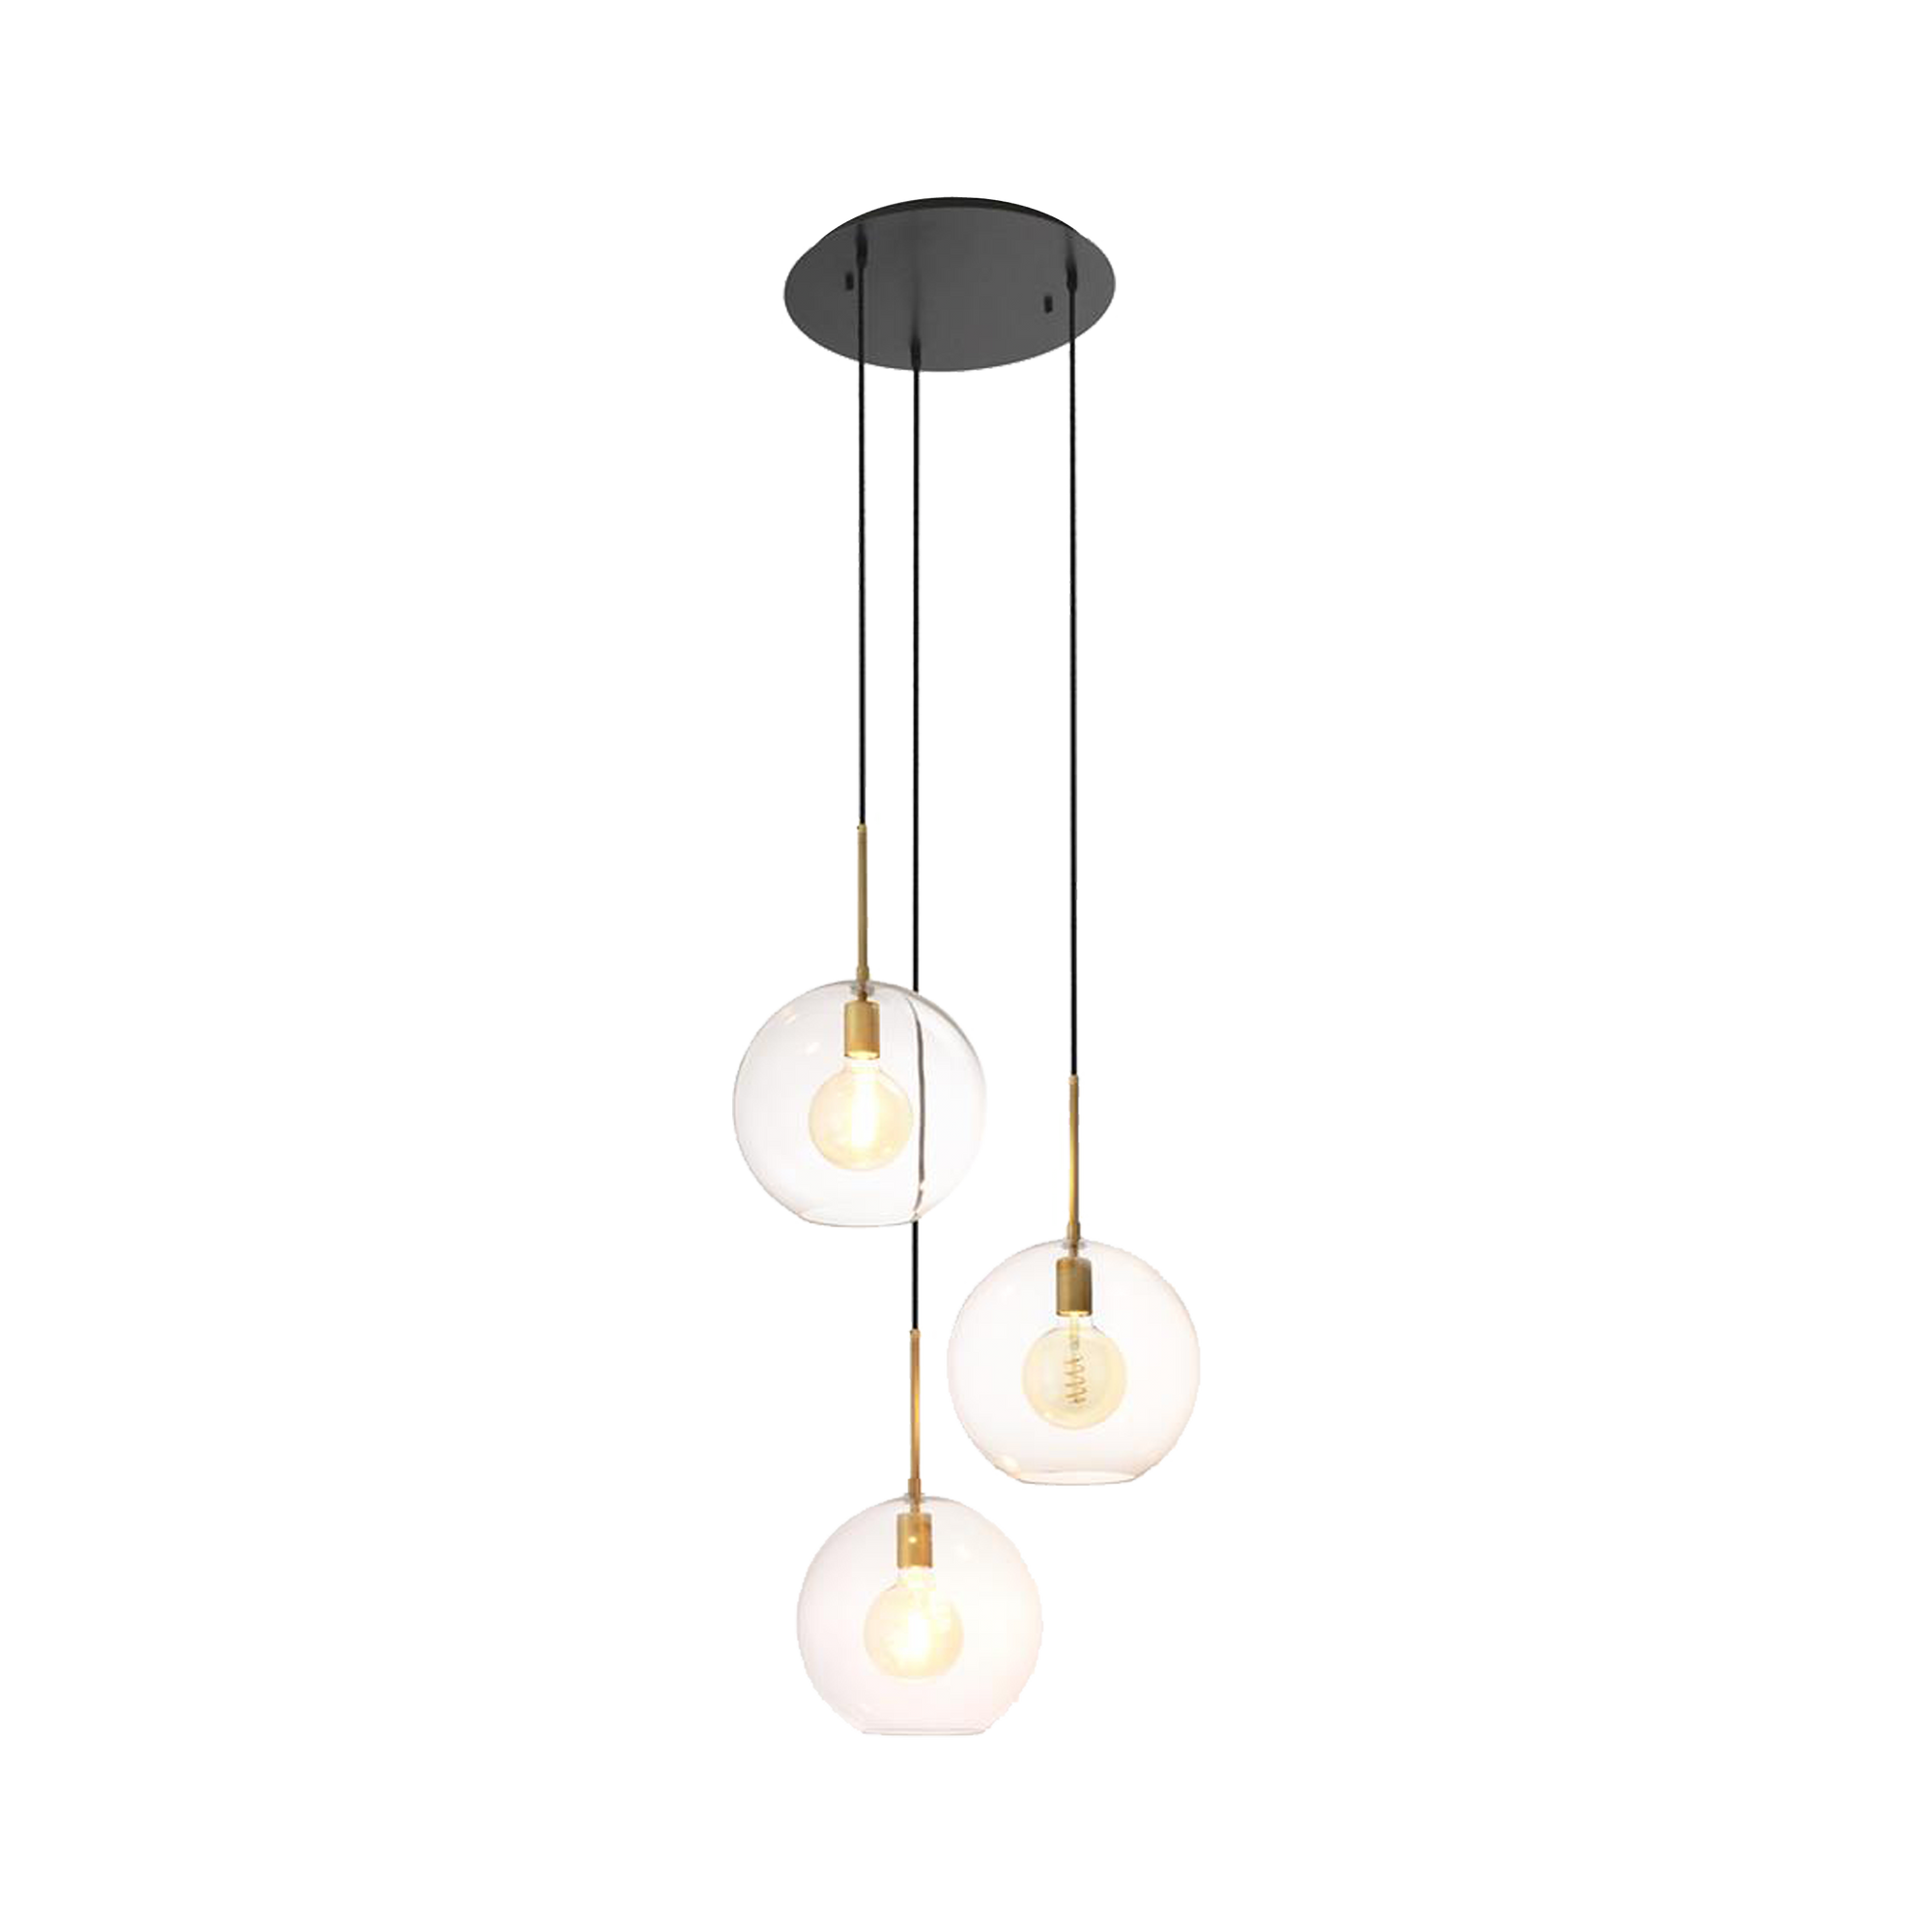 From illuminating your family dinners to casting light over a kitchen island, the Romano Chandelier is a stylish addition to your home.